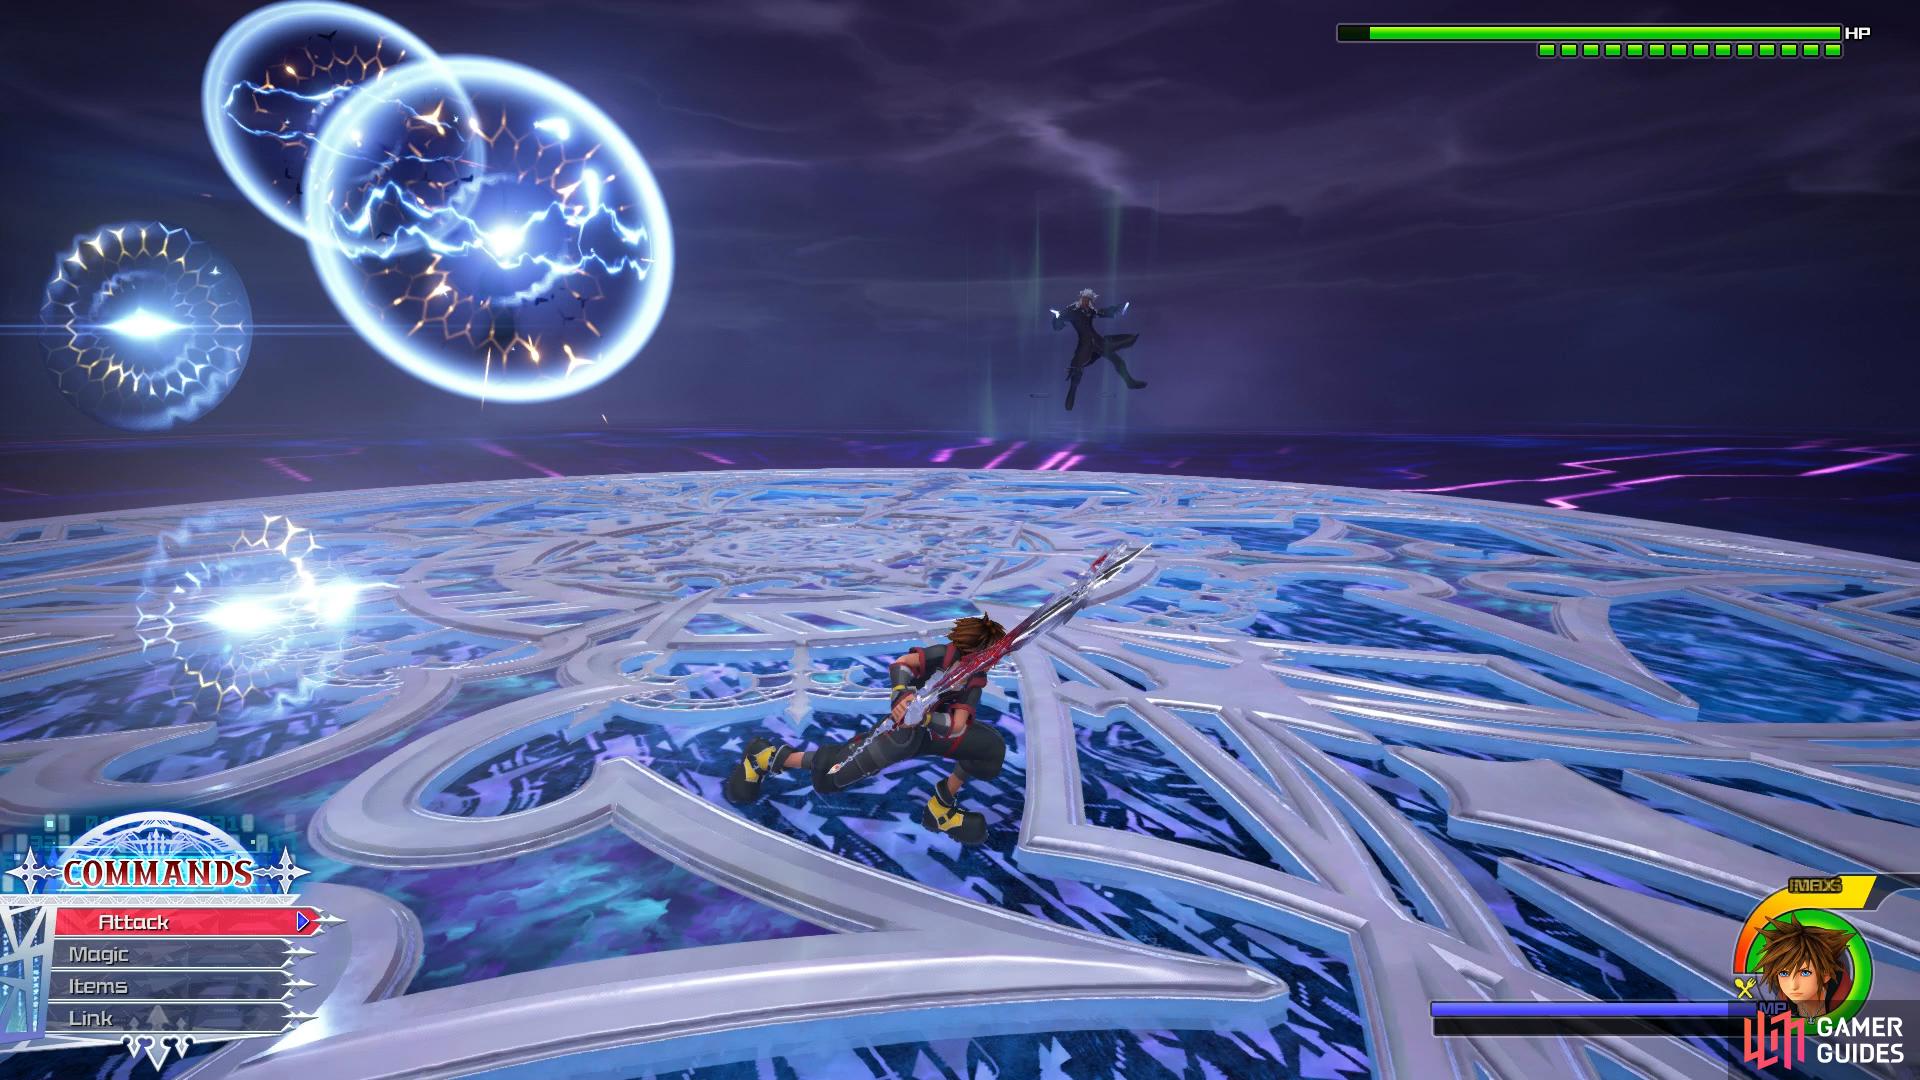 the Electrical Orbs will home in on Sora